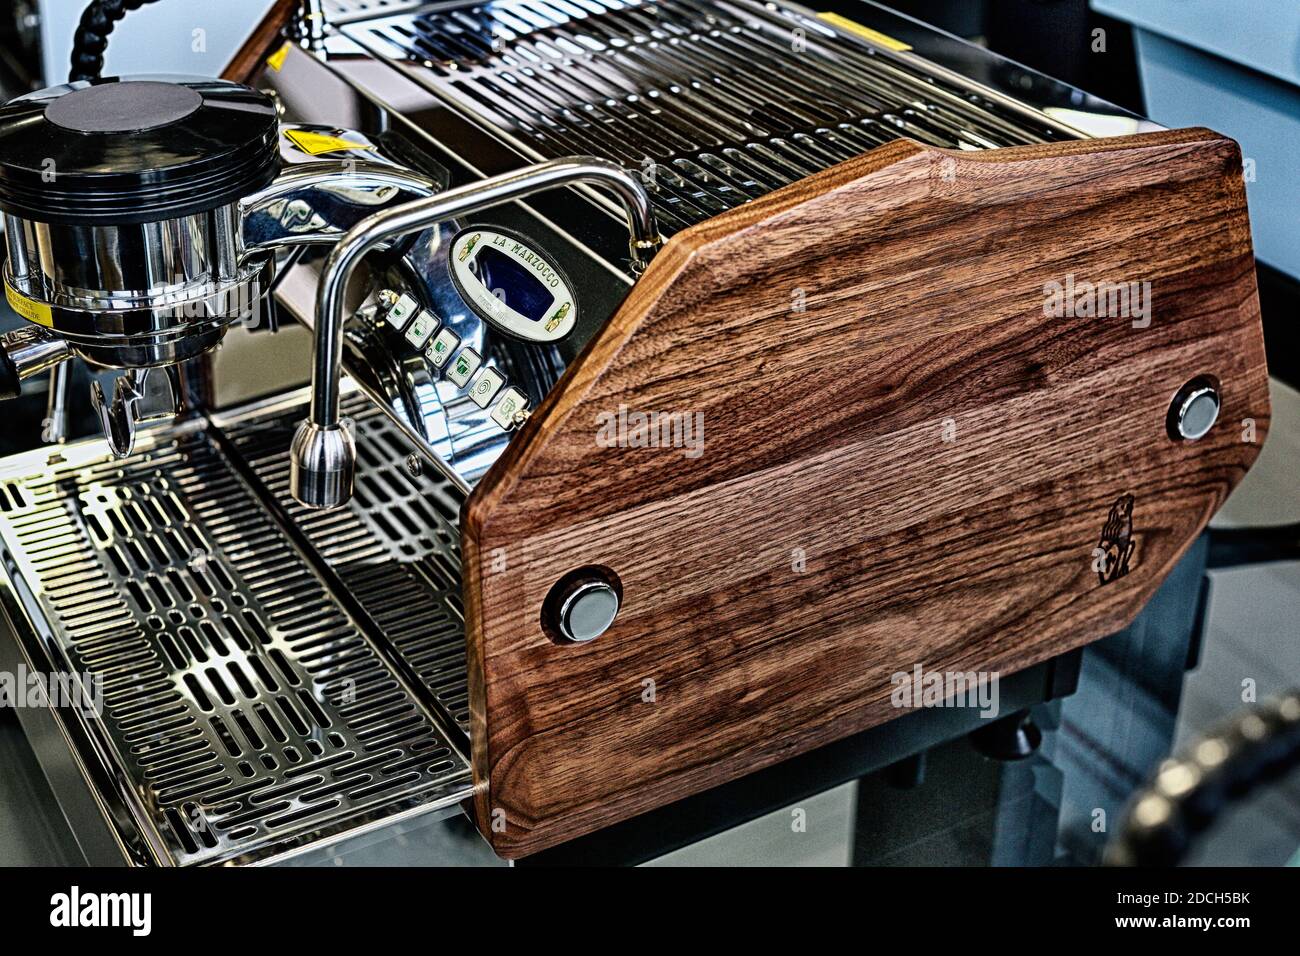 La Marzocco espresso machines handmade one-off customizations for clients.high quality, superbly crafted and uniquely designed espresso machines. Stock Photo